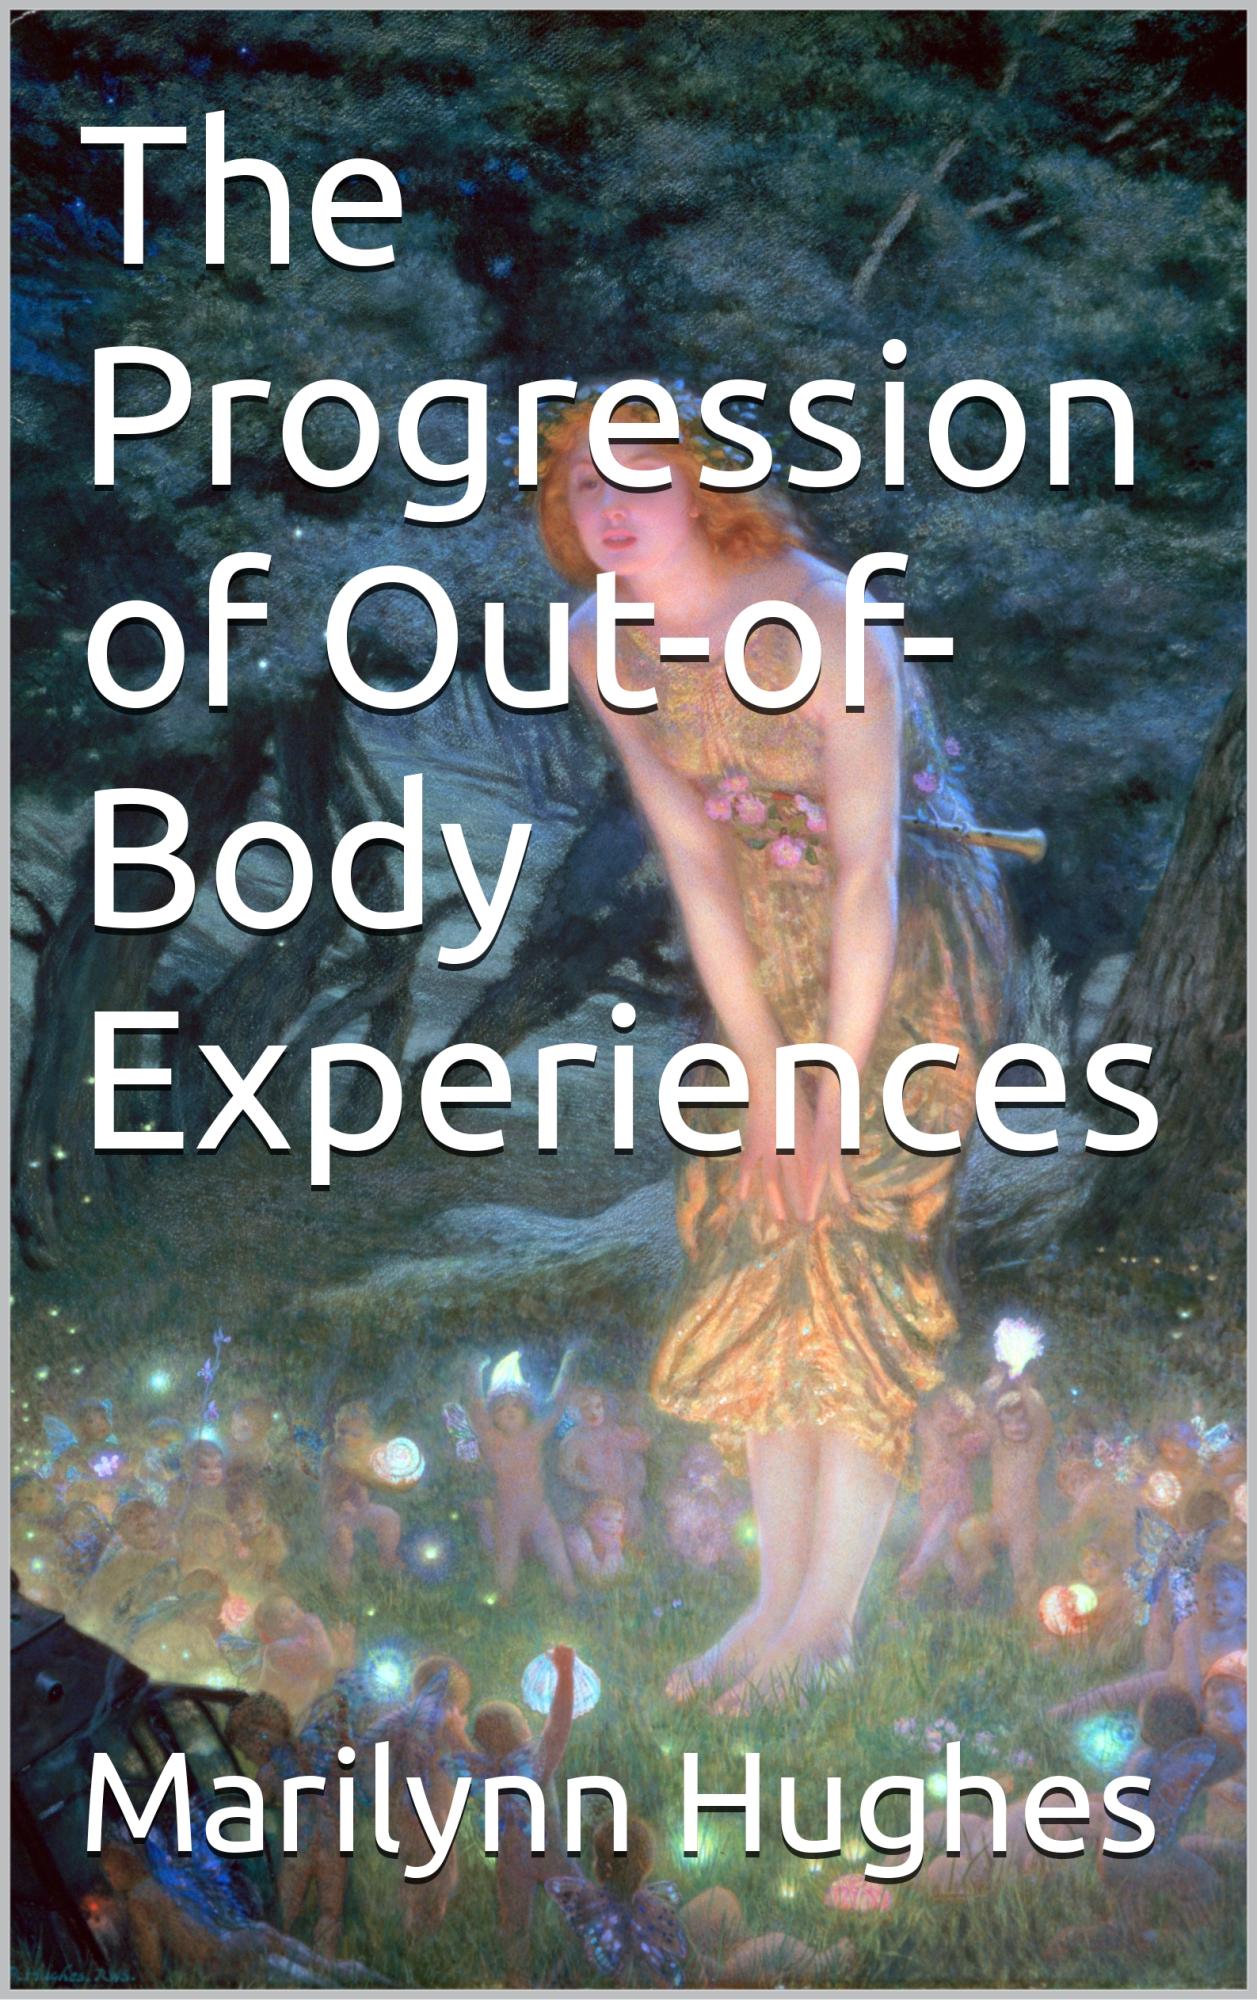 Get a glimpse into the evolutionary nature of how out-of-body experiences progress and a soul is taken more deeply into wisdom through out of body travel.